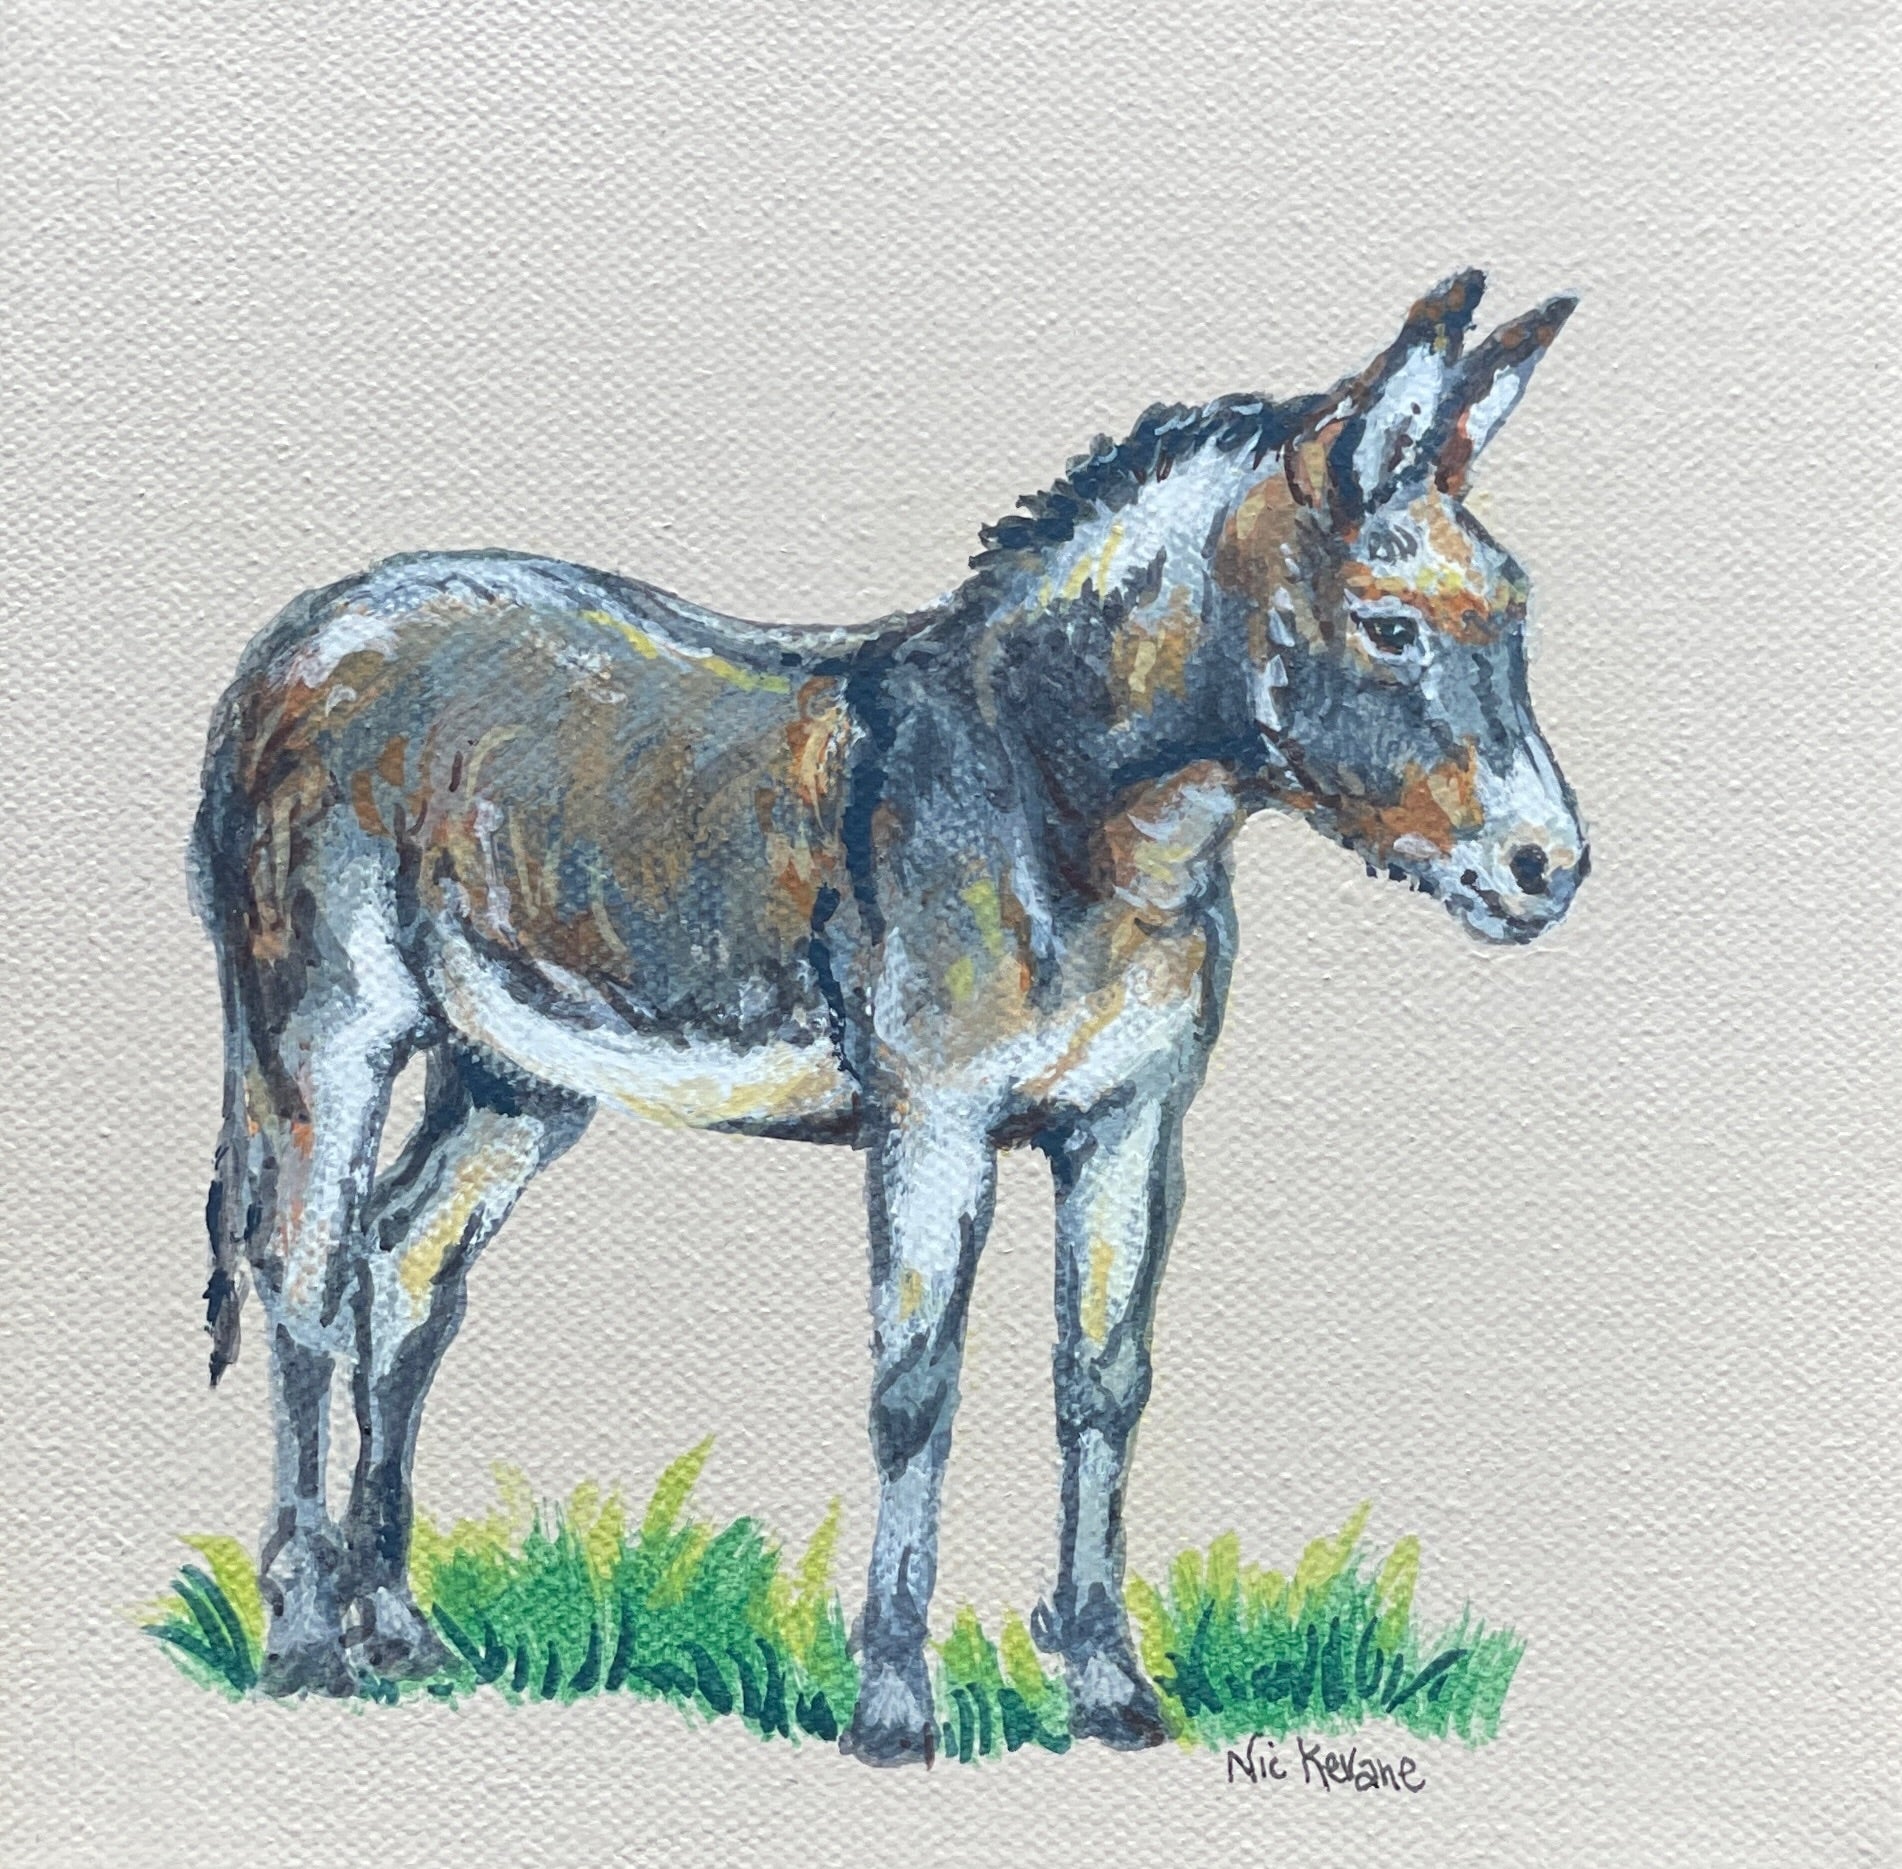 Little Donkey - My mini paintings depict various countryside subjects painted on soft off-white backgrounds.